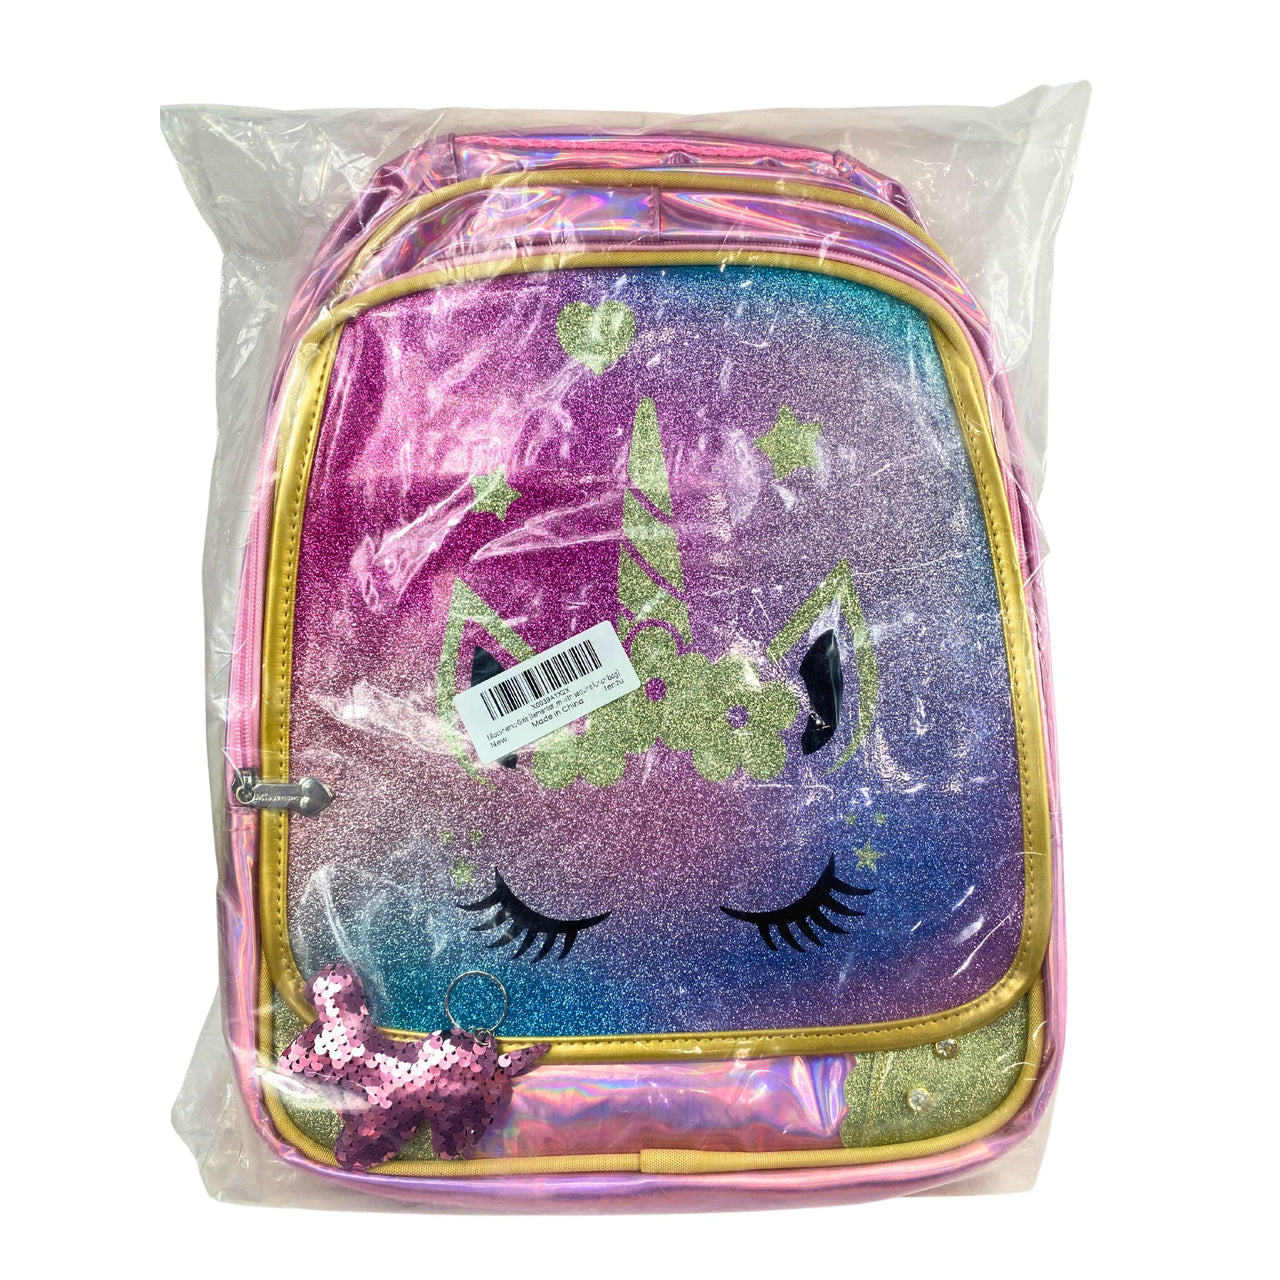 Mloovnemo Girls Elementar..rn with Sequins Lunch Bag